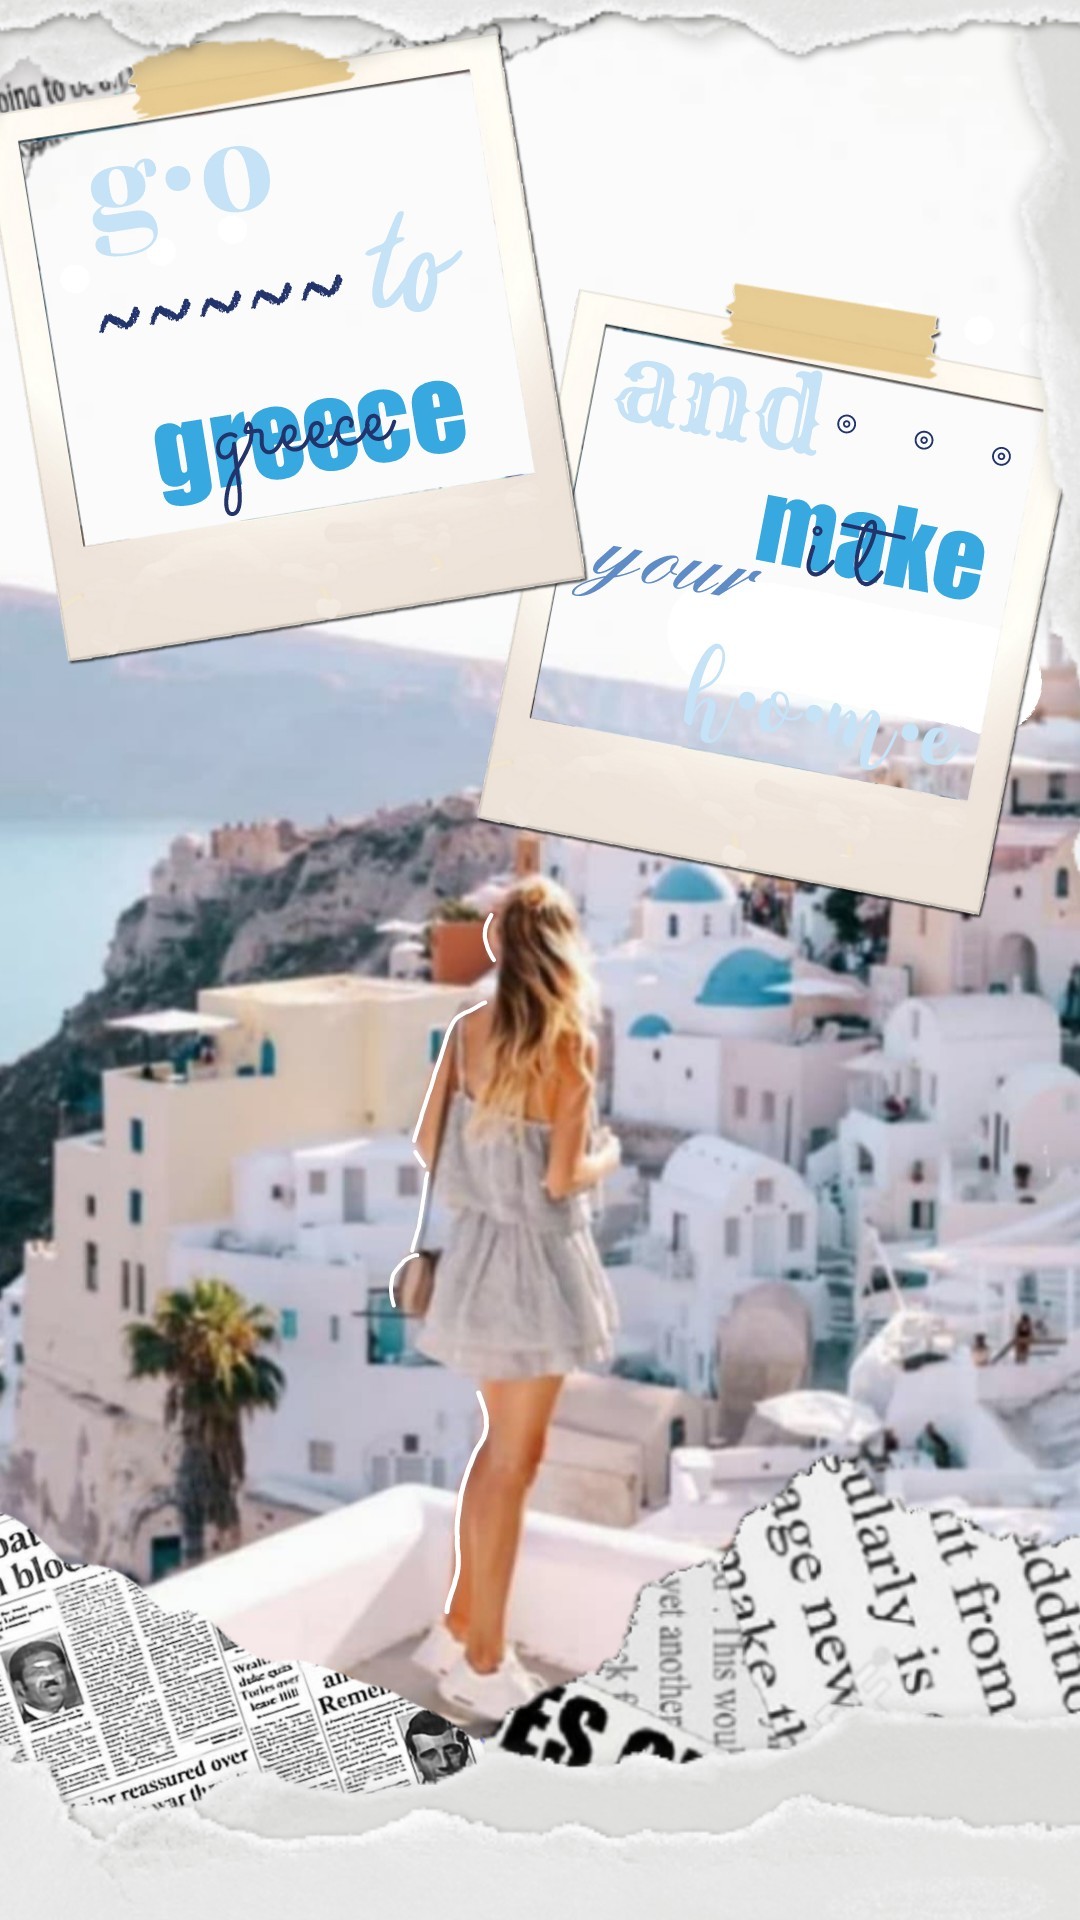 💙 my entry to wanderlustfantastic-s games. the theme is Greece :) 🌊